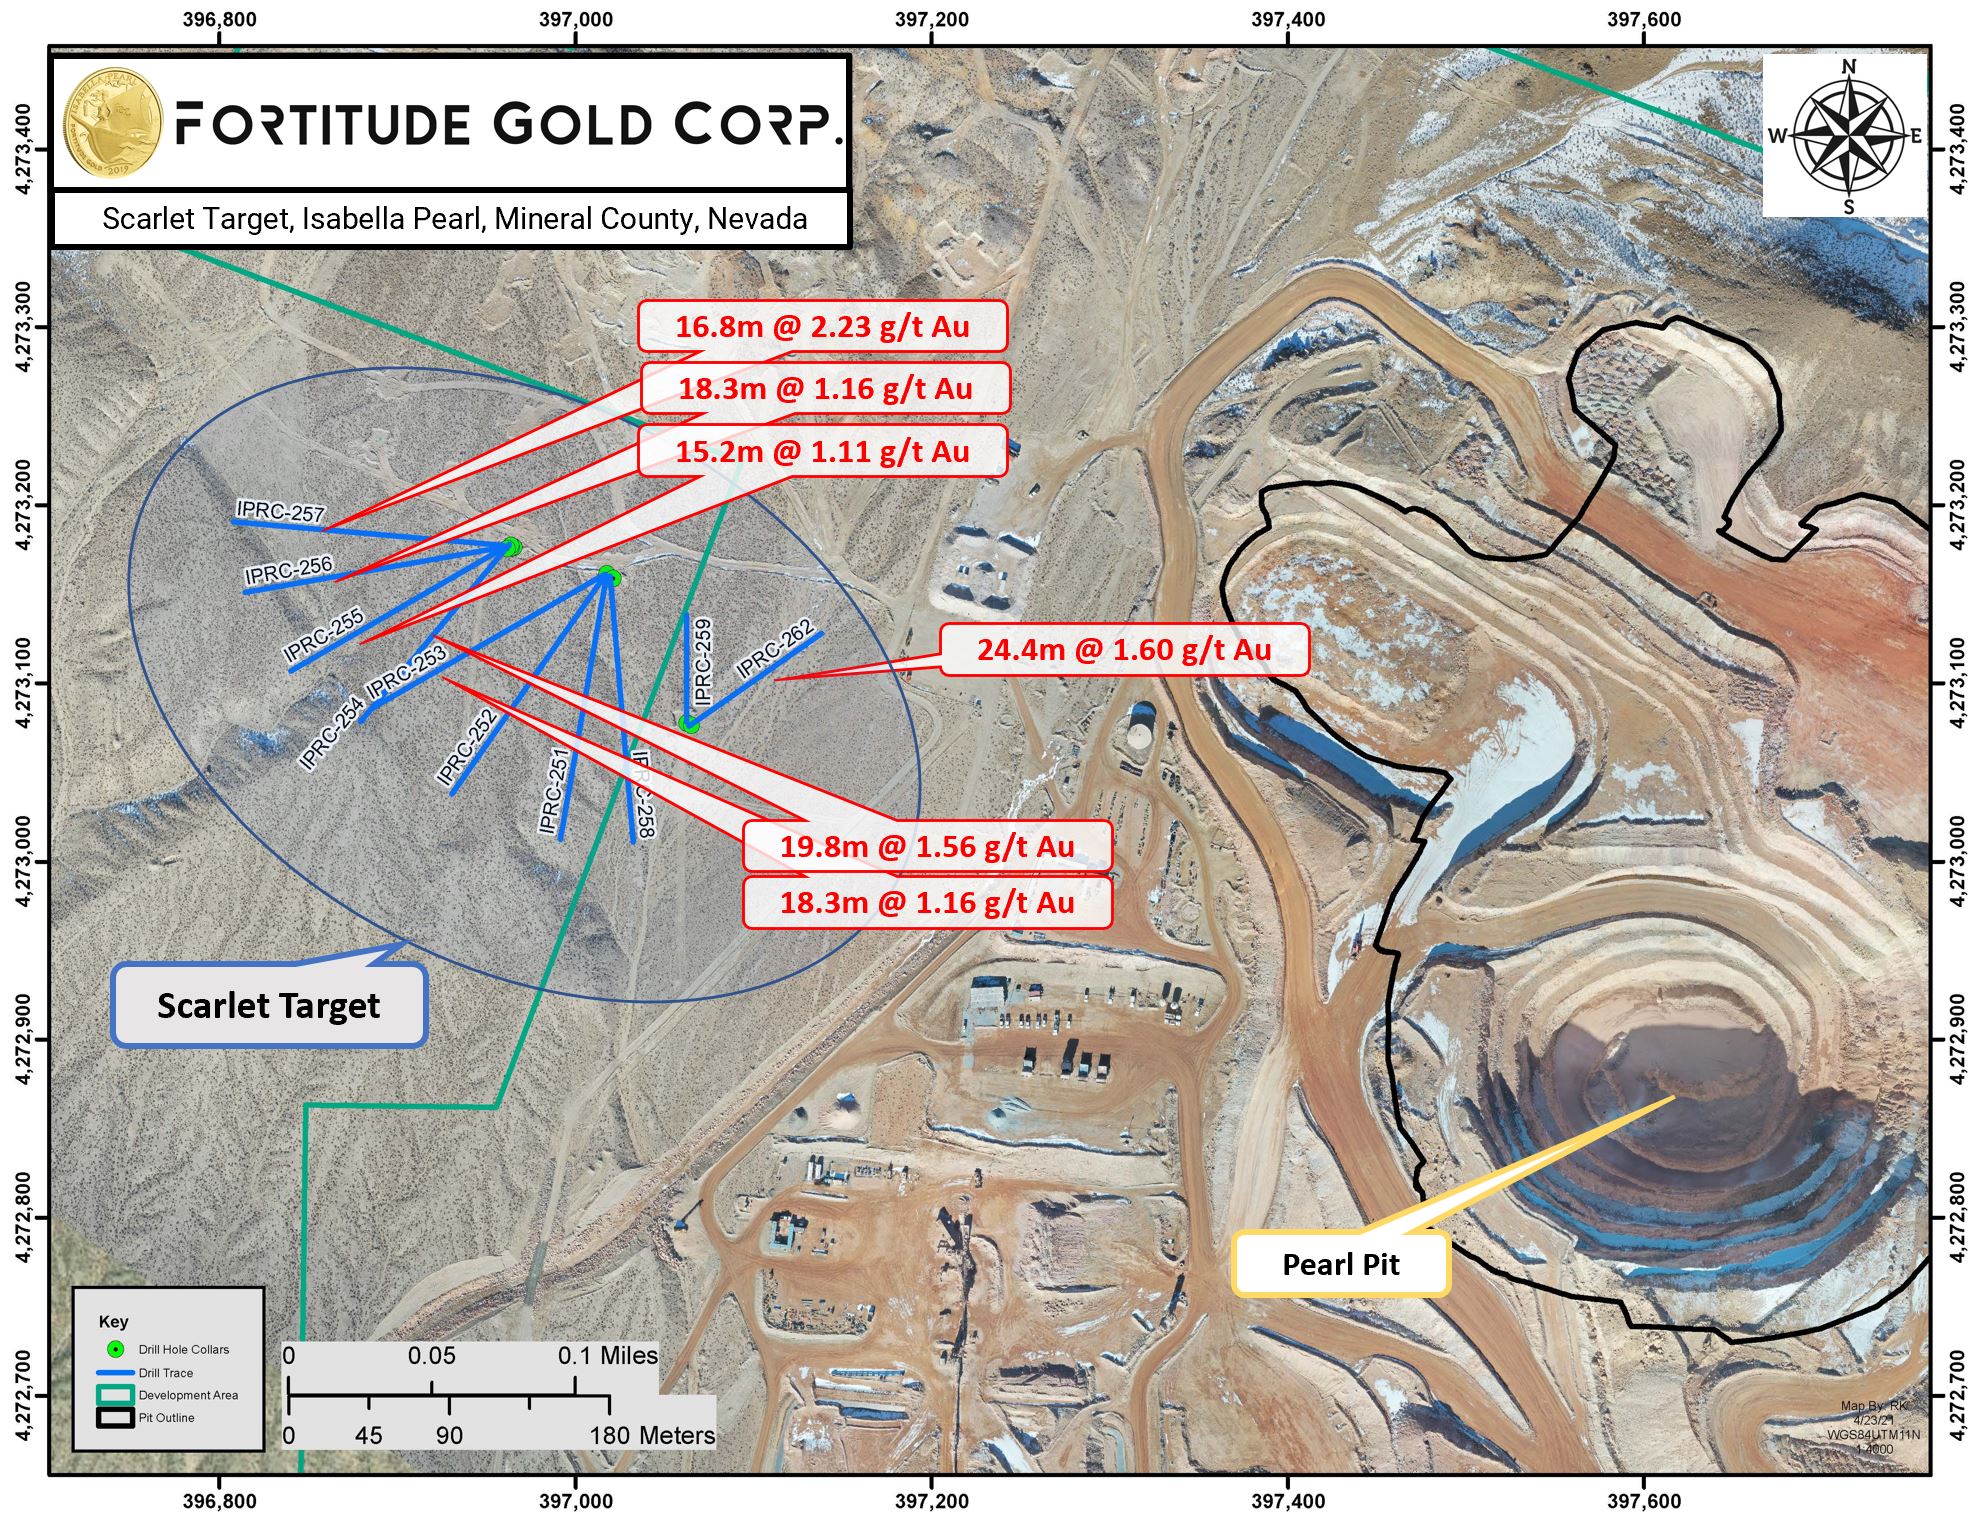 Fortitude Gold: News Releases